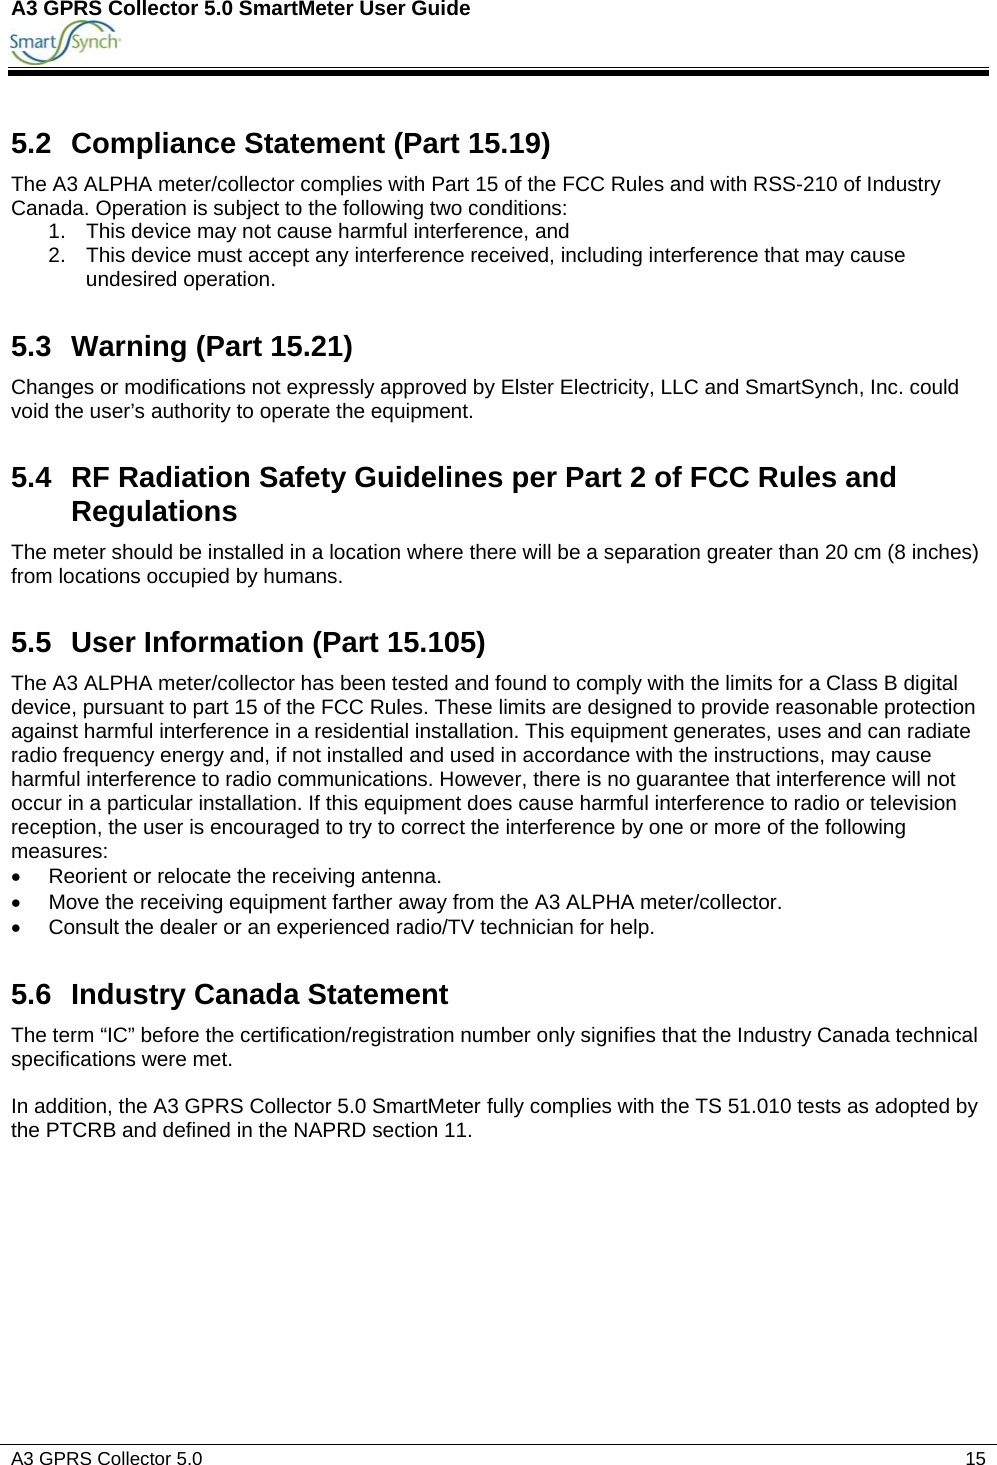 A3 GPRS Collector 5.0 SmartMeter User Guide          A3 GPRS Collector 5.0    15  5.2  Compliance Statement (Part 15.19) The A3 ALPHA meter/collector complies with Part 15 of the FCC Rules and with RSS-210 of Industry Canada. Operation is subject to the following two conditions: 1.  This device may not cause harmful interference, and 2.  This device must accept any interference received, including interference that may cause undesired operation. 5.3 Warning (Part 15.21) Changes or modifications not expressly approved by Elster Electricity, LLC and SmartSynch, Inc. could void the user’s authority to operate the equipment. 5.4  RF Radiation Safety Guidelines per Part 2 of FCC Rules and Regulations The meter should be installed in a location where there will be a separation greater than 20 cm (8 inches) from locations occupied by humans. 5.5  User Information (Part 15.105) The A3 ALPHA meter/collector has been tested and found to comply with the limits for a Class B digital device, pursuant to part 15 of the FCC Rules. These limits are designed to provide reasonable protection against harmful interference in a residential installation. This equipment generates, uses and can radiate radio frequency energy and, if not installed and used in accordance with the instructions, may cause harmful interference to radio communications. However, there is no guarantee that interference will not occur in a particular installation. If this equipment does cause harmful interference to radio or television reception, the user is encouraged to try to correct the interference by one or more of the following measures: •  Reorient or relocate the receiving antenna. •  Move the receiving equipment farther away from the A3 ALPHA meter/collector. •  Consult the dealer or an experienced radio/TV technician for help. 5.6  Industry Canada Statement The term “IC” before the certification/registration number only signifies that the Industry Canada technical specifications were met.  In addition, the A3 GPRS Collector 5.0 SmartMeter fully complies with the TS 51.010 tests as adopted by the PTCRB and defined in the NAPRD section 11.    